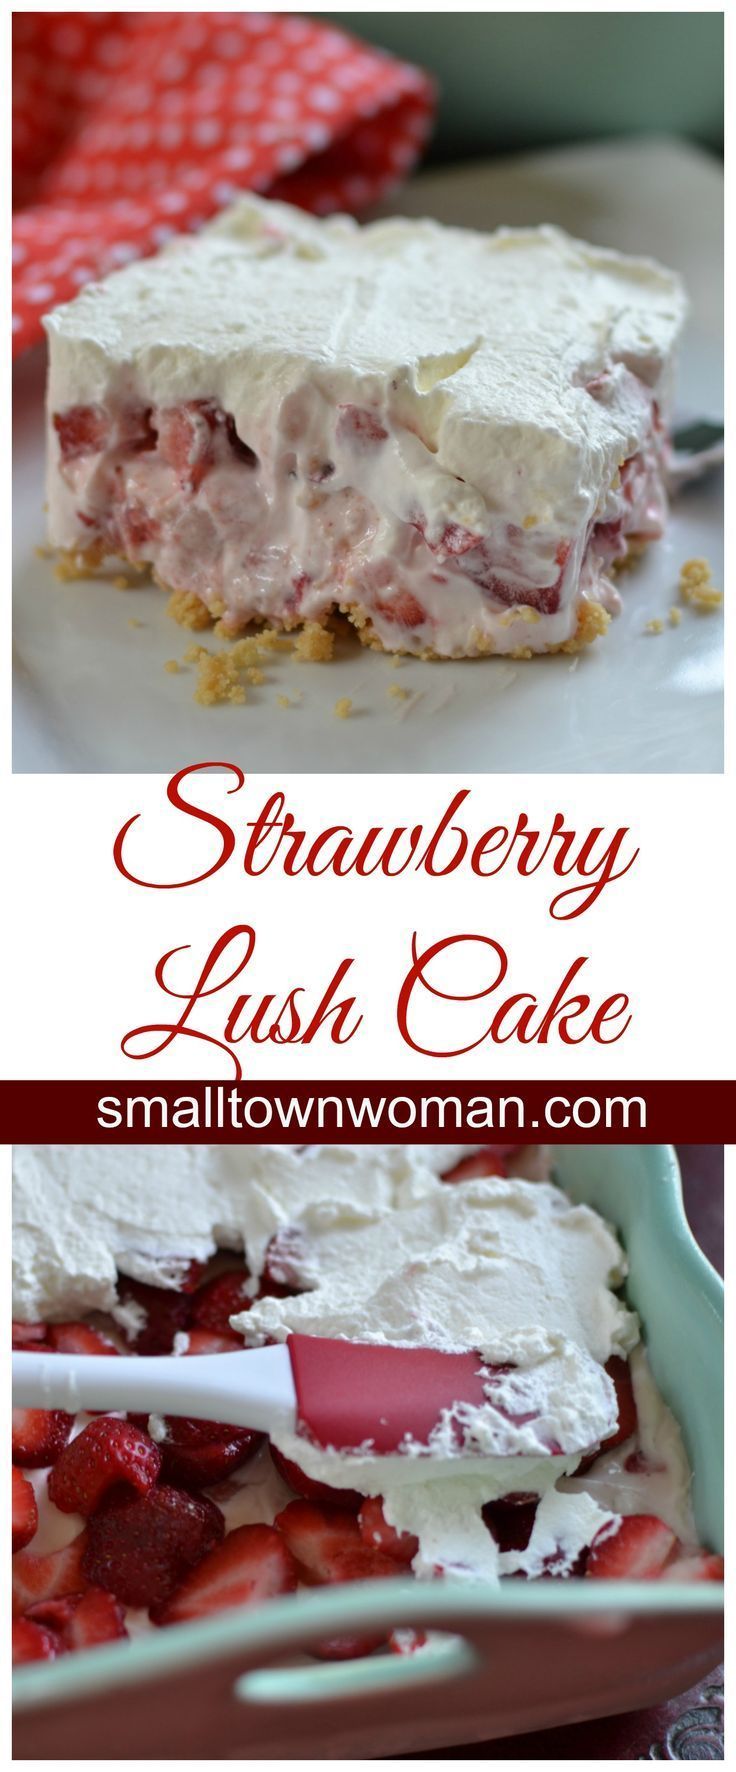 This no bake beauty can be made in no time!  It is so delish you will be trying to lick your plate when no one is watching!  Trust